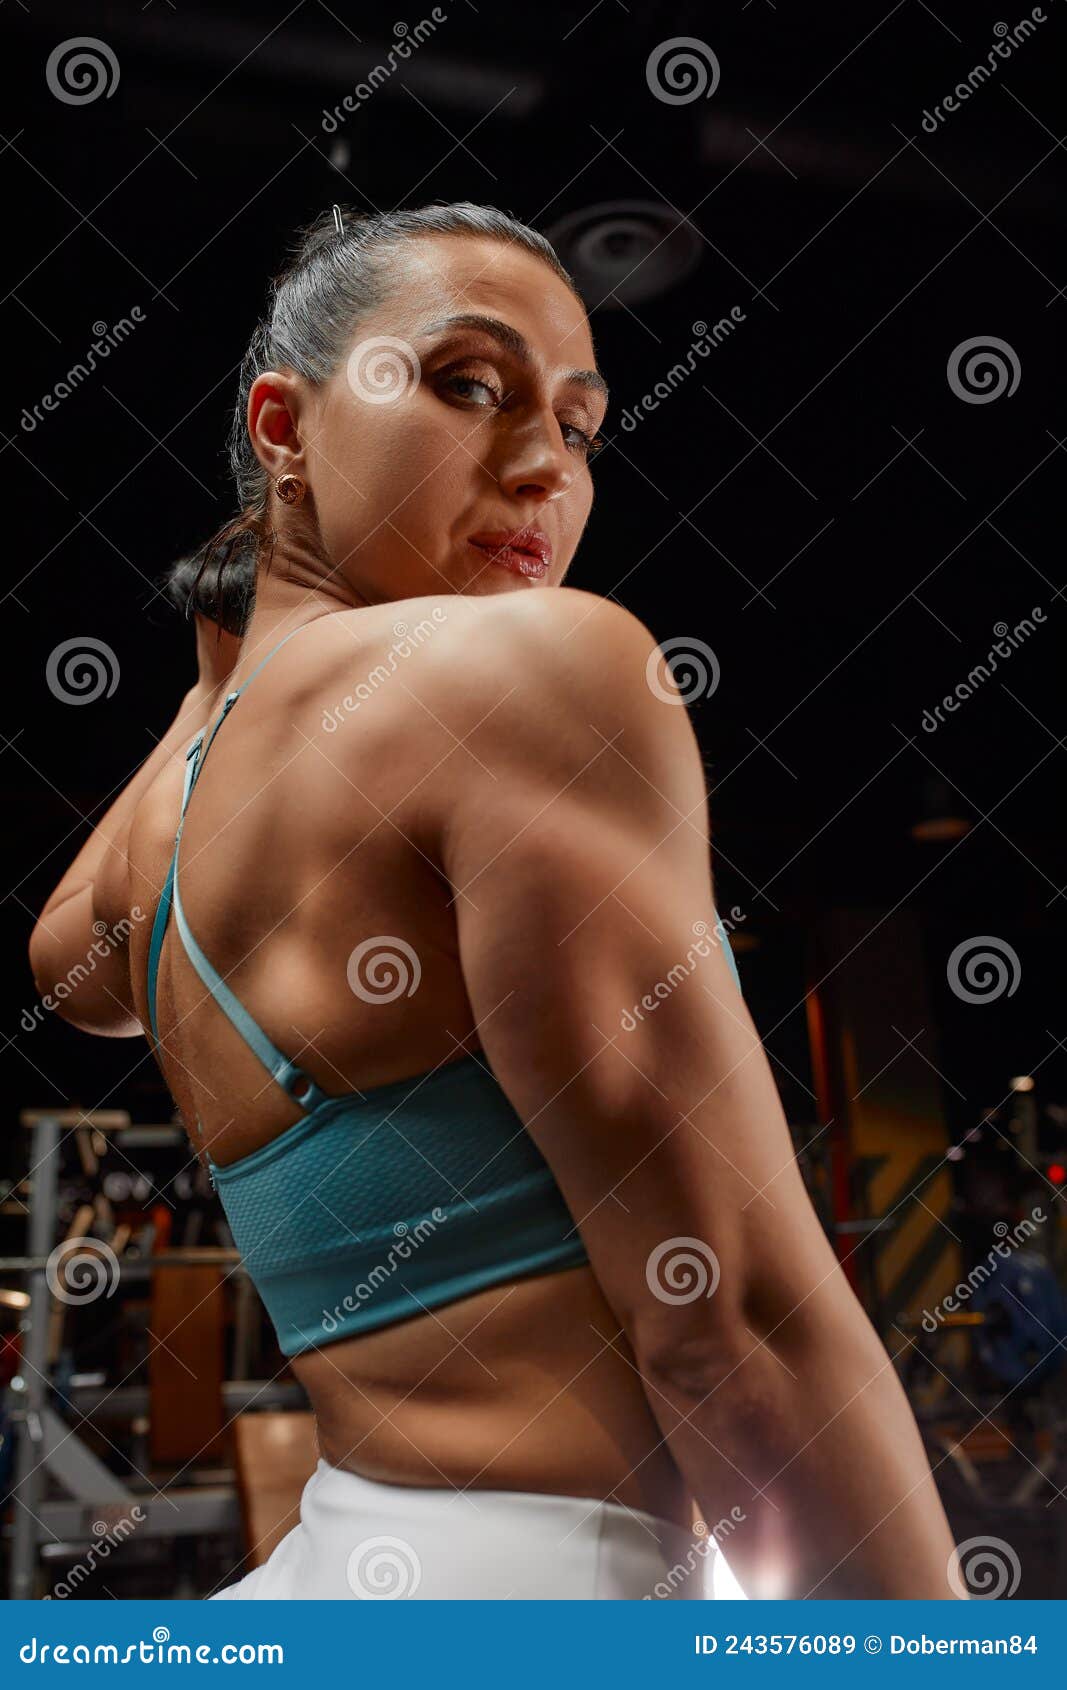 Muscular woman in gym showing back muscles. - Stock Photo [88157617] -  PIXTA